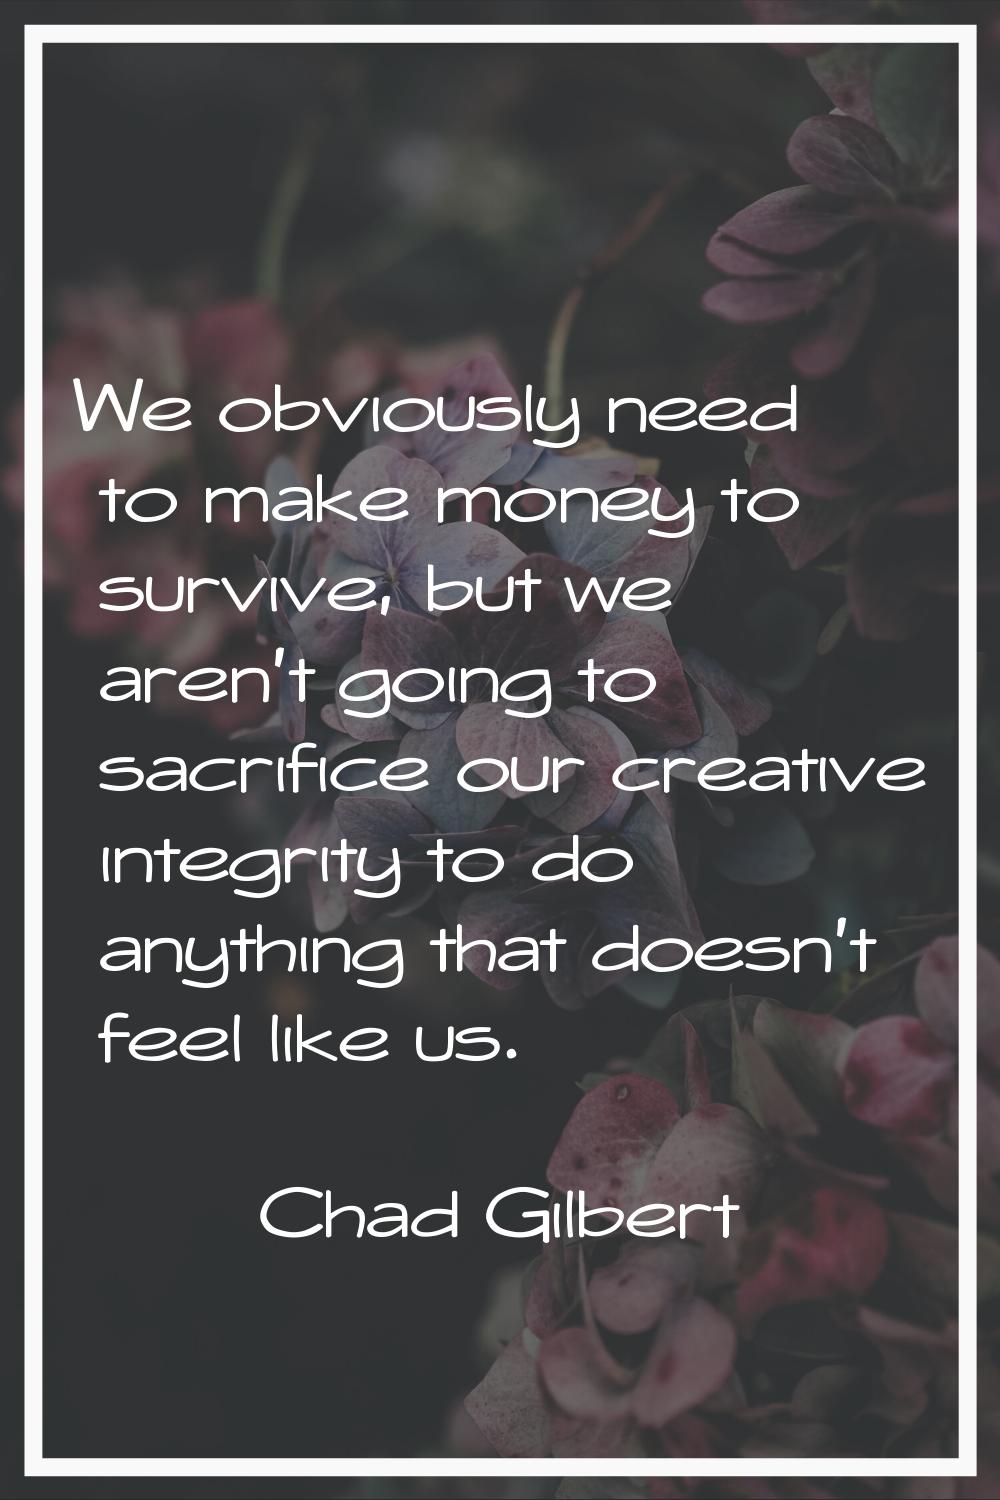 We obviously need to make money to survive, but we aren't going to sacrifice our creative integrity